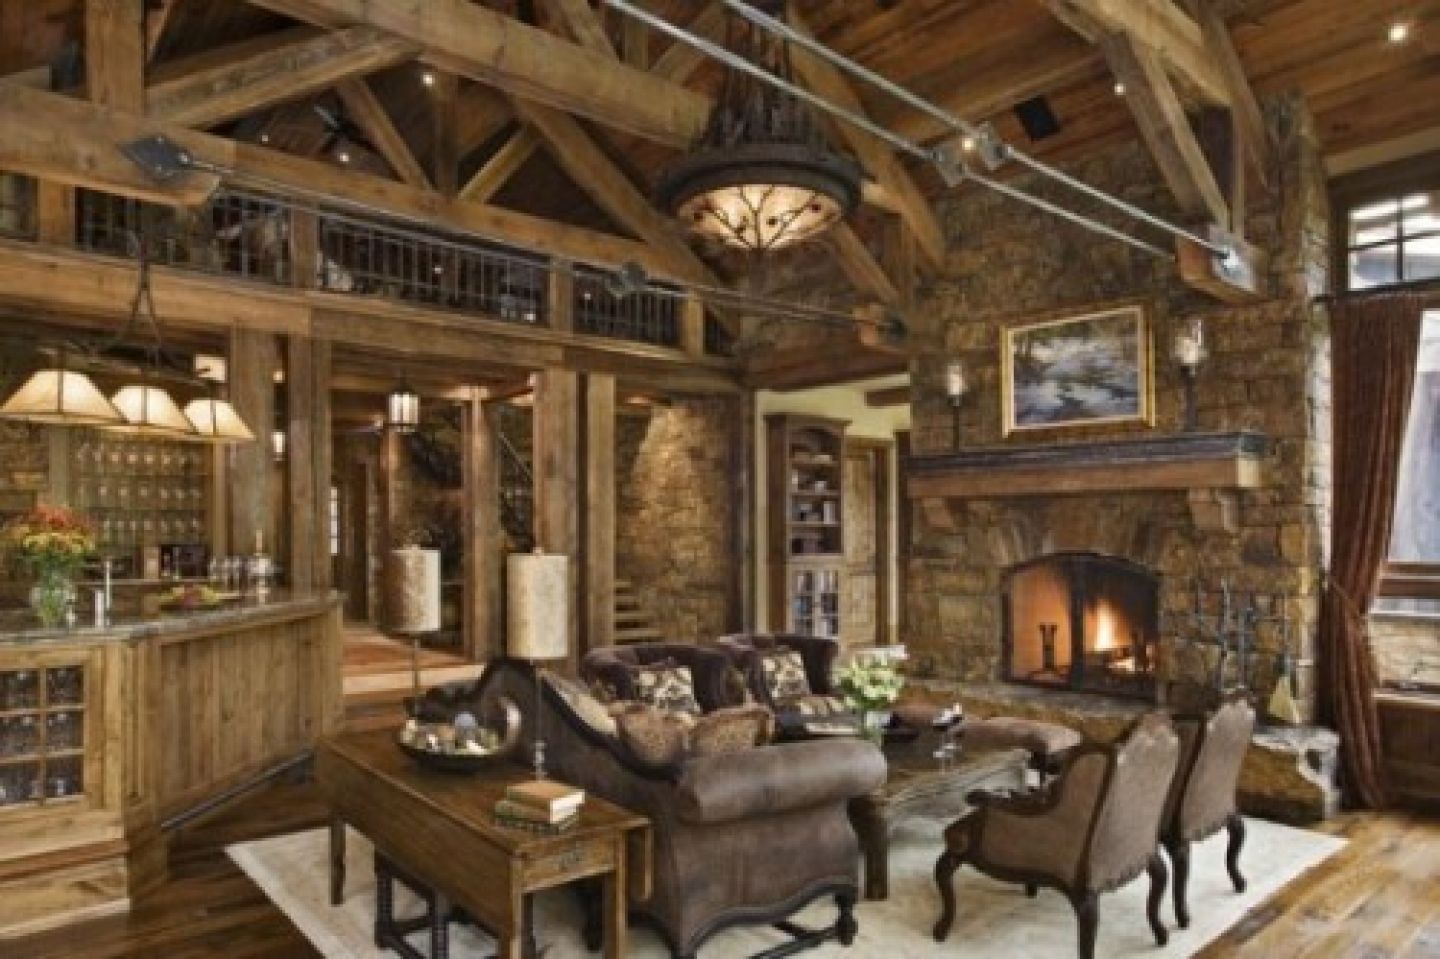 Living Room Couch Rustic Living Room With Leather Couch And Exposed Wooden Beam Idea Feat Amazing Stone Fireplace Mantel Panel Design Living Room Rustic Living Room Appears Fantastic Performance